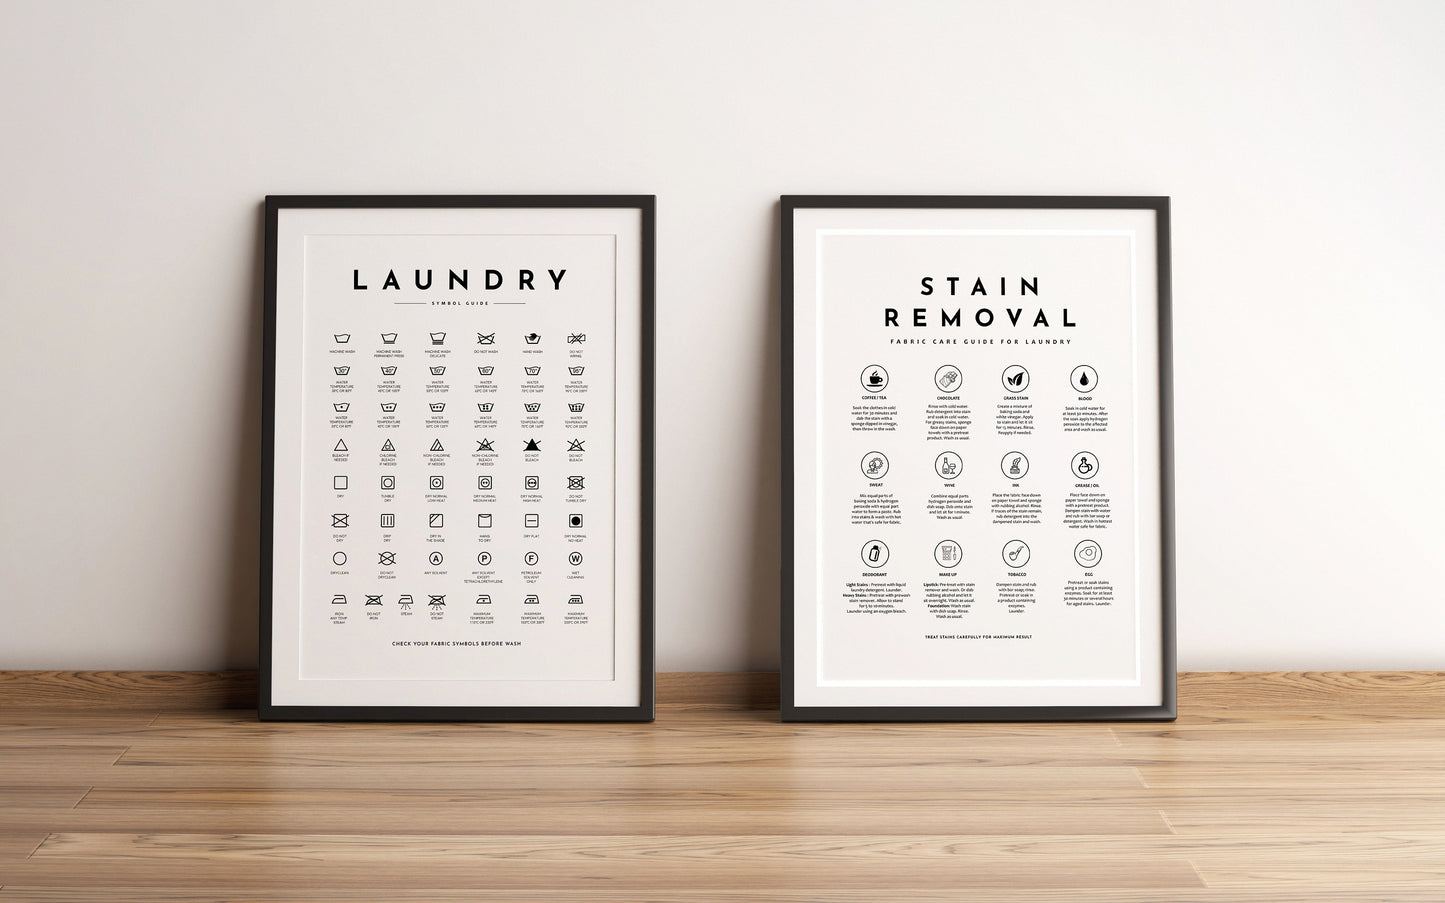 Laundry Care and Stain Guide Poster Laundry Symbols Guide Poster